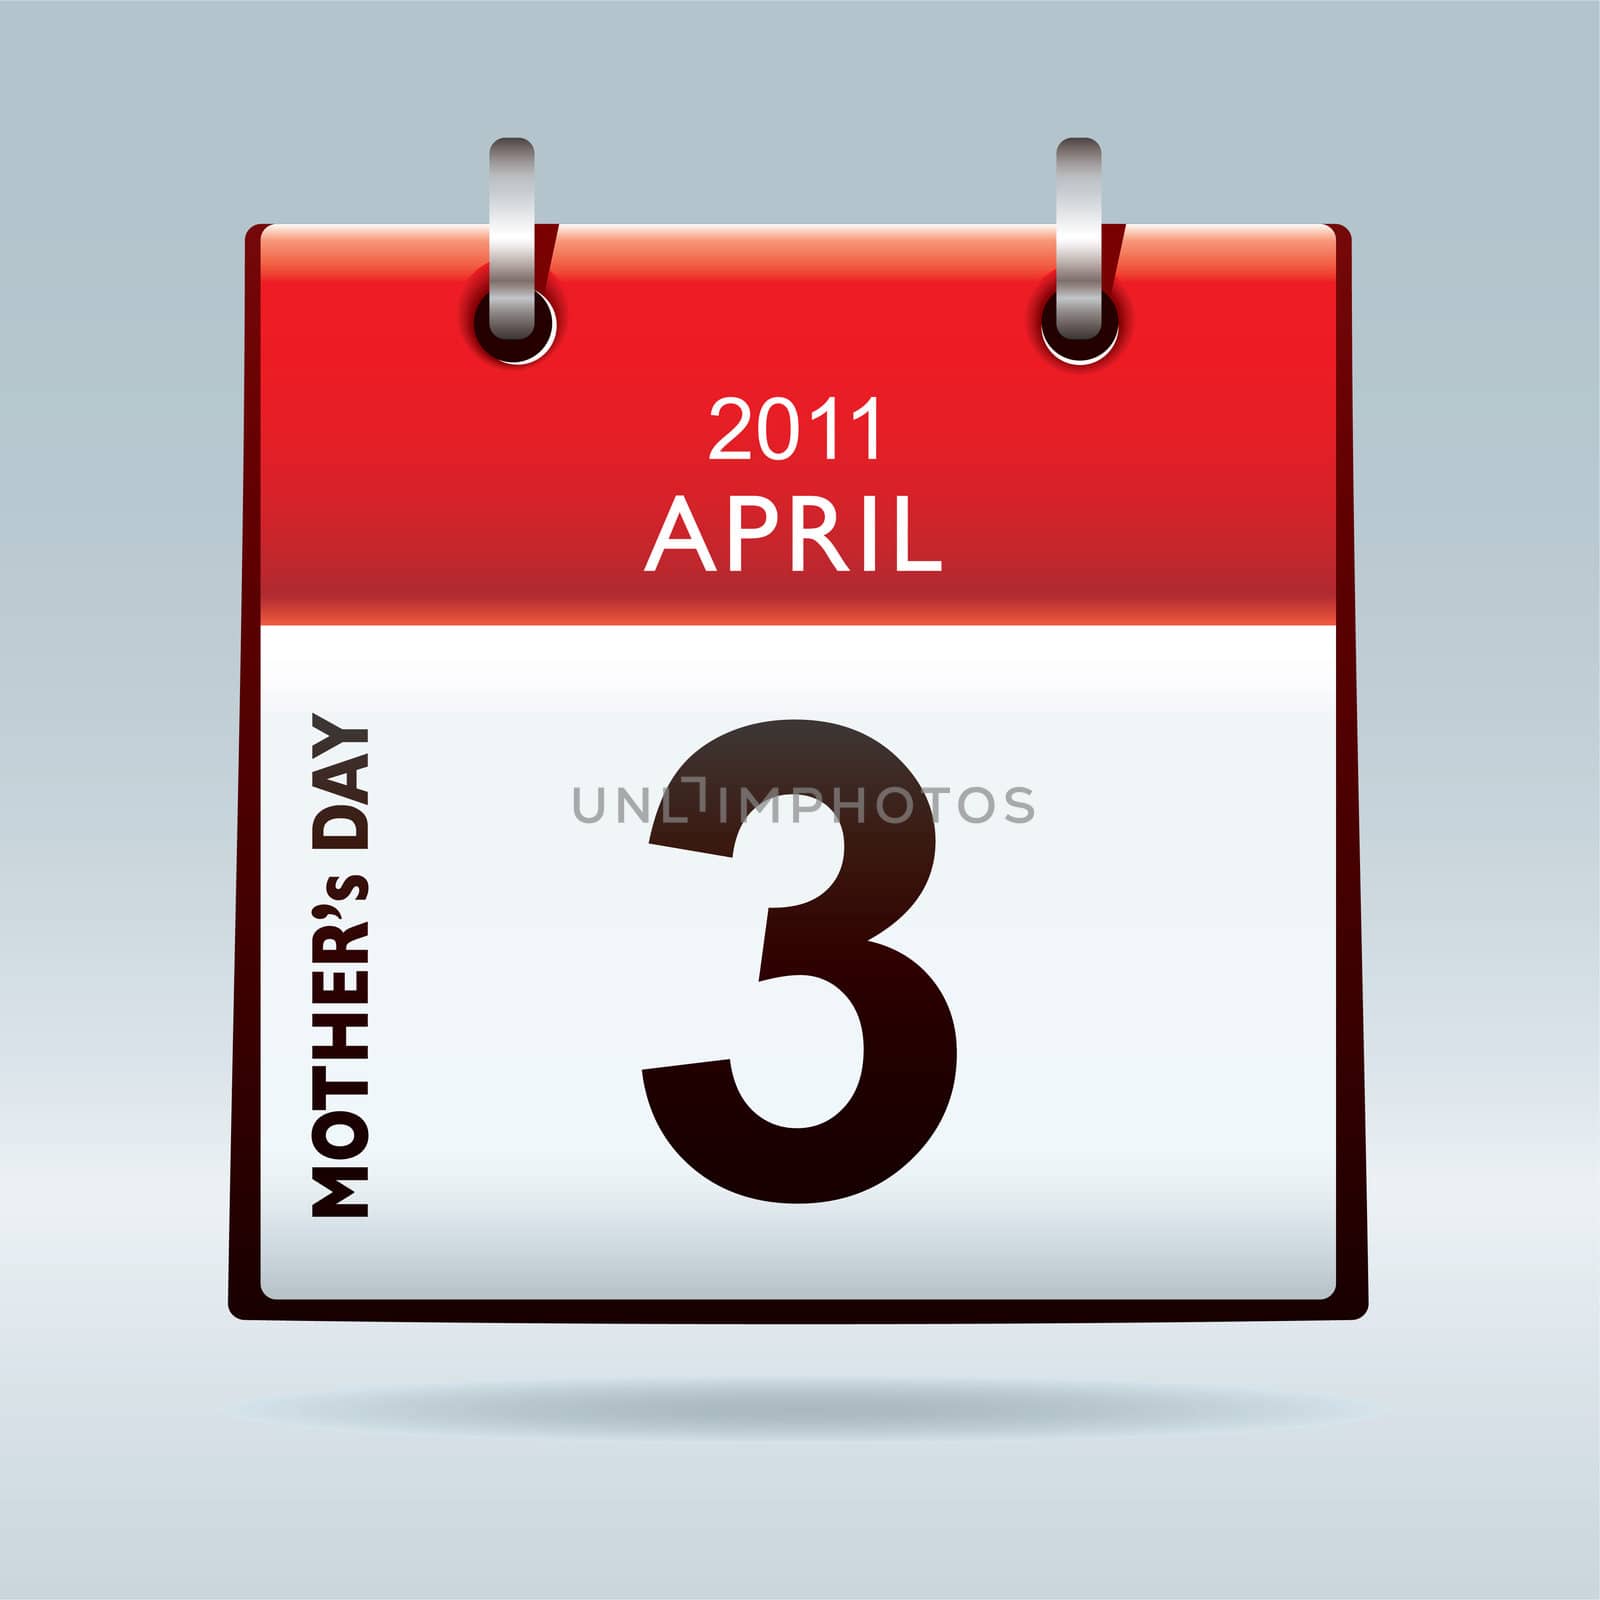 Mothers day 2011 calendar icon with red top